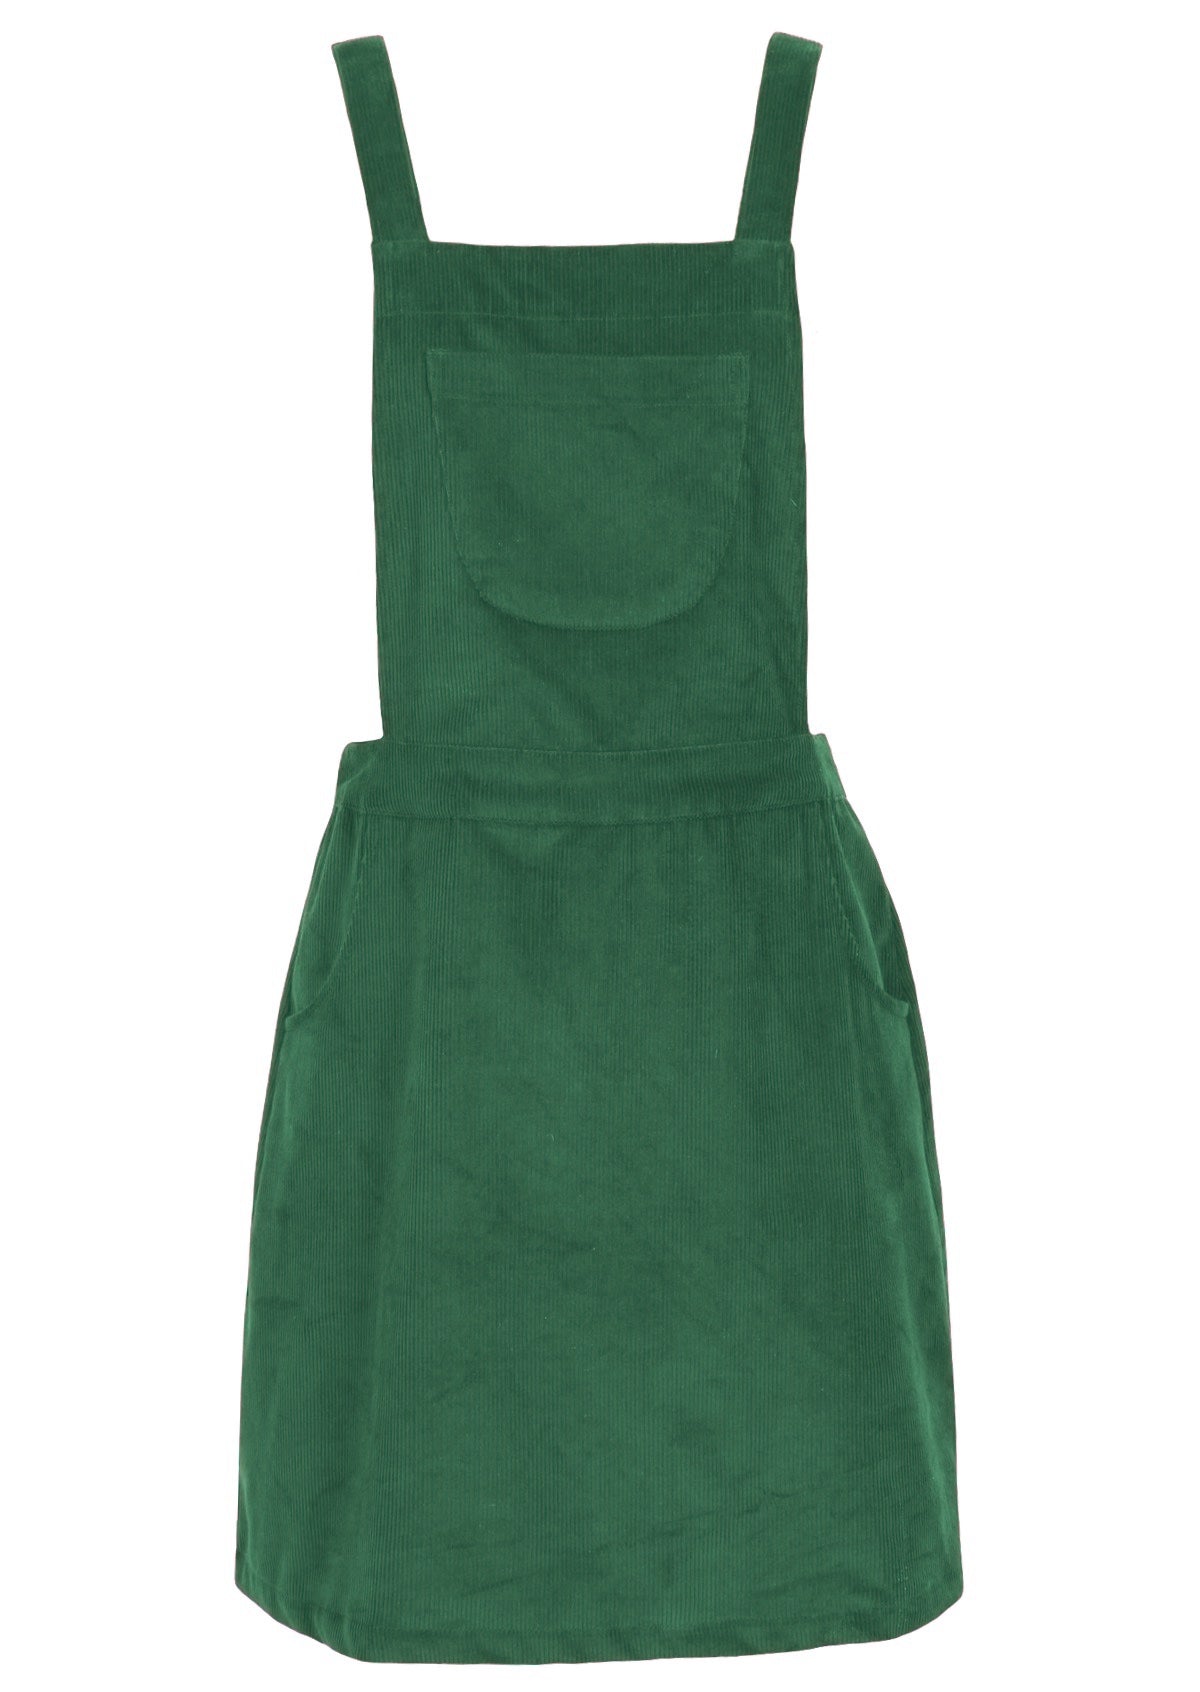 100% cotton corduroy pinafore in green has side pockets and a bib pocket. 